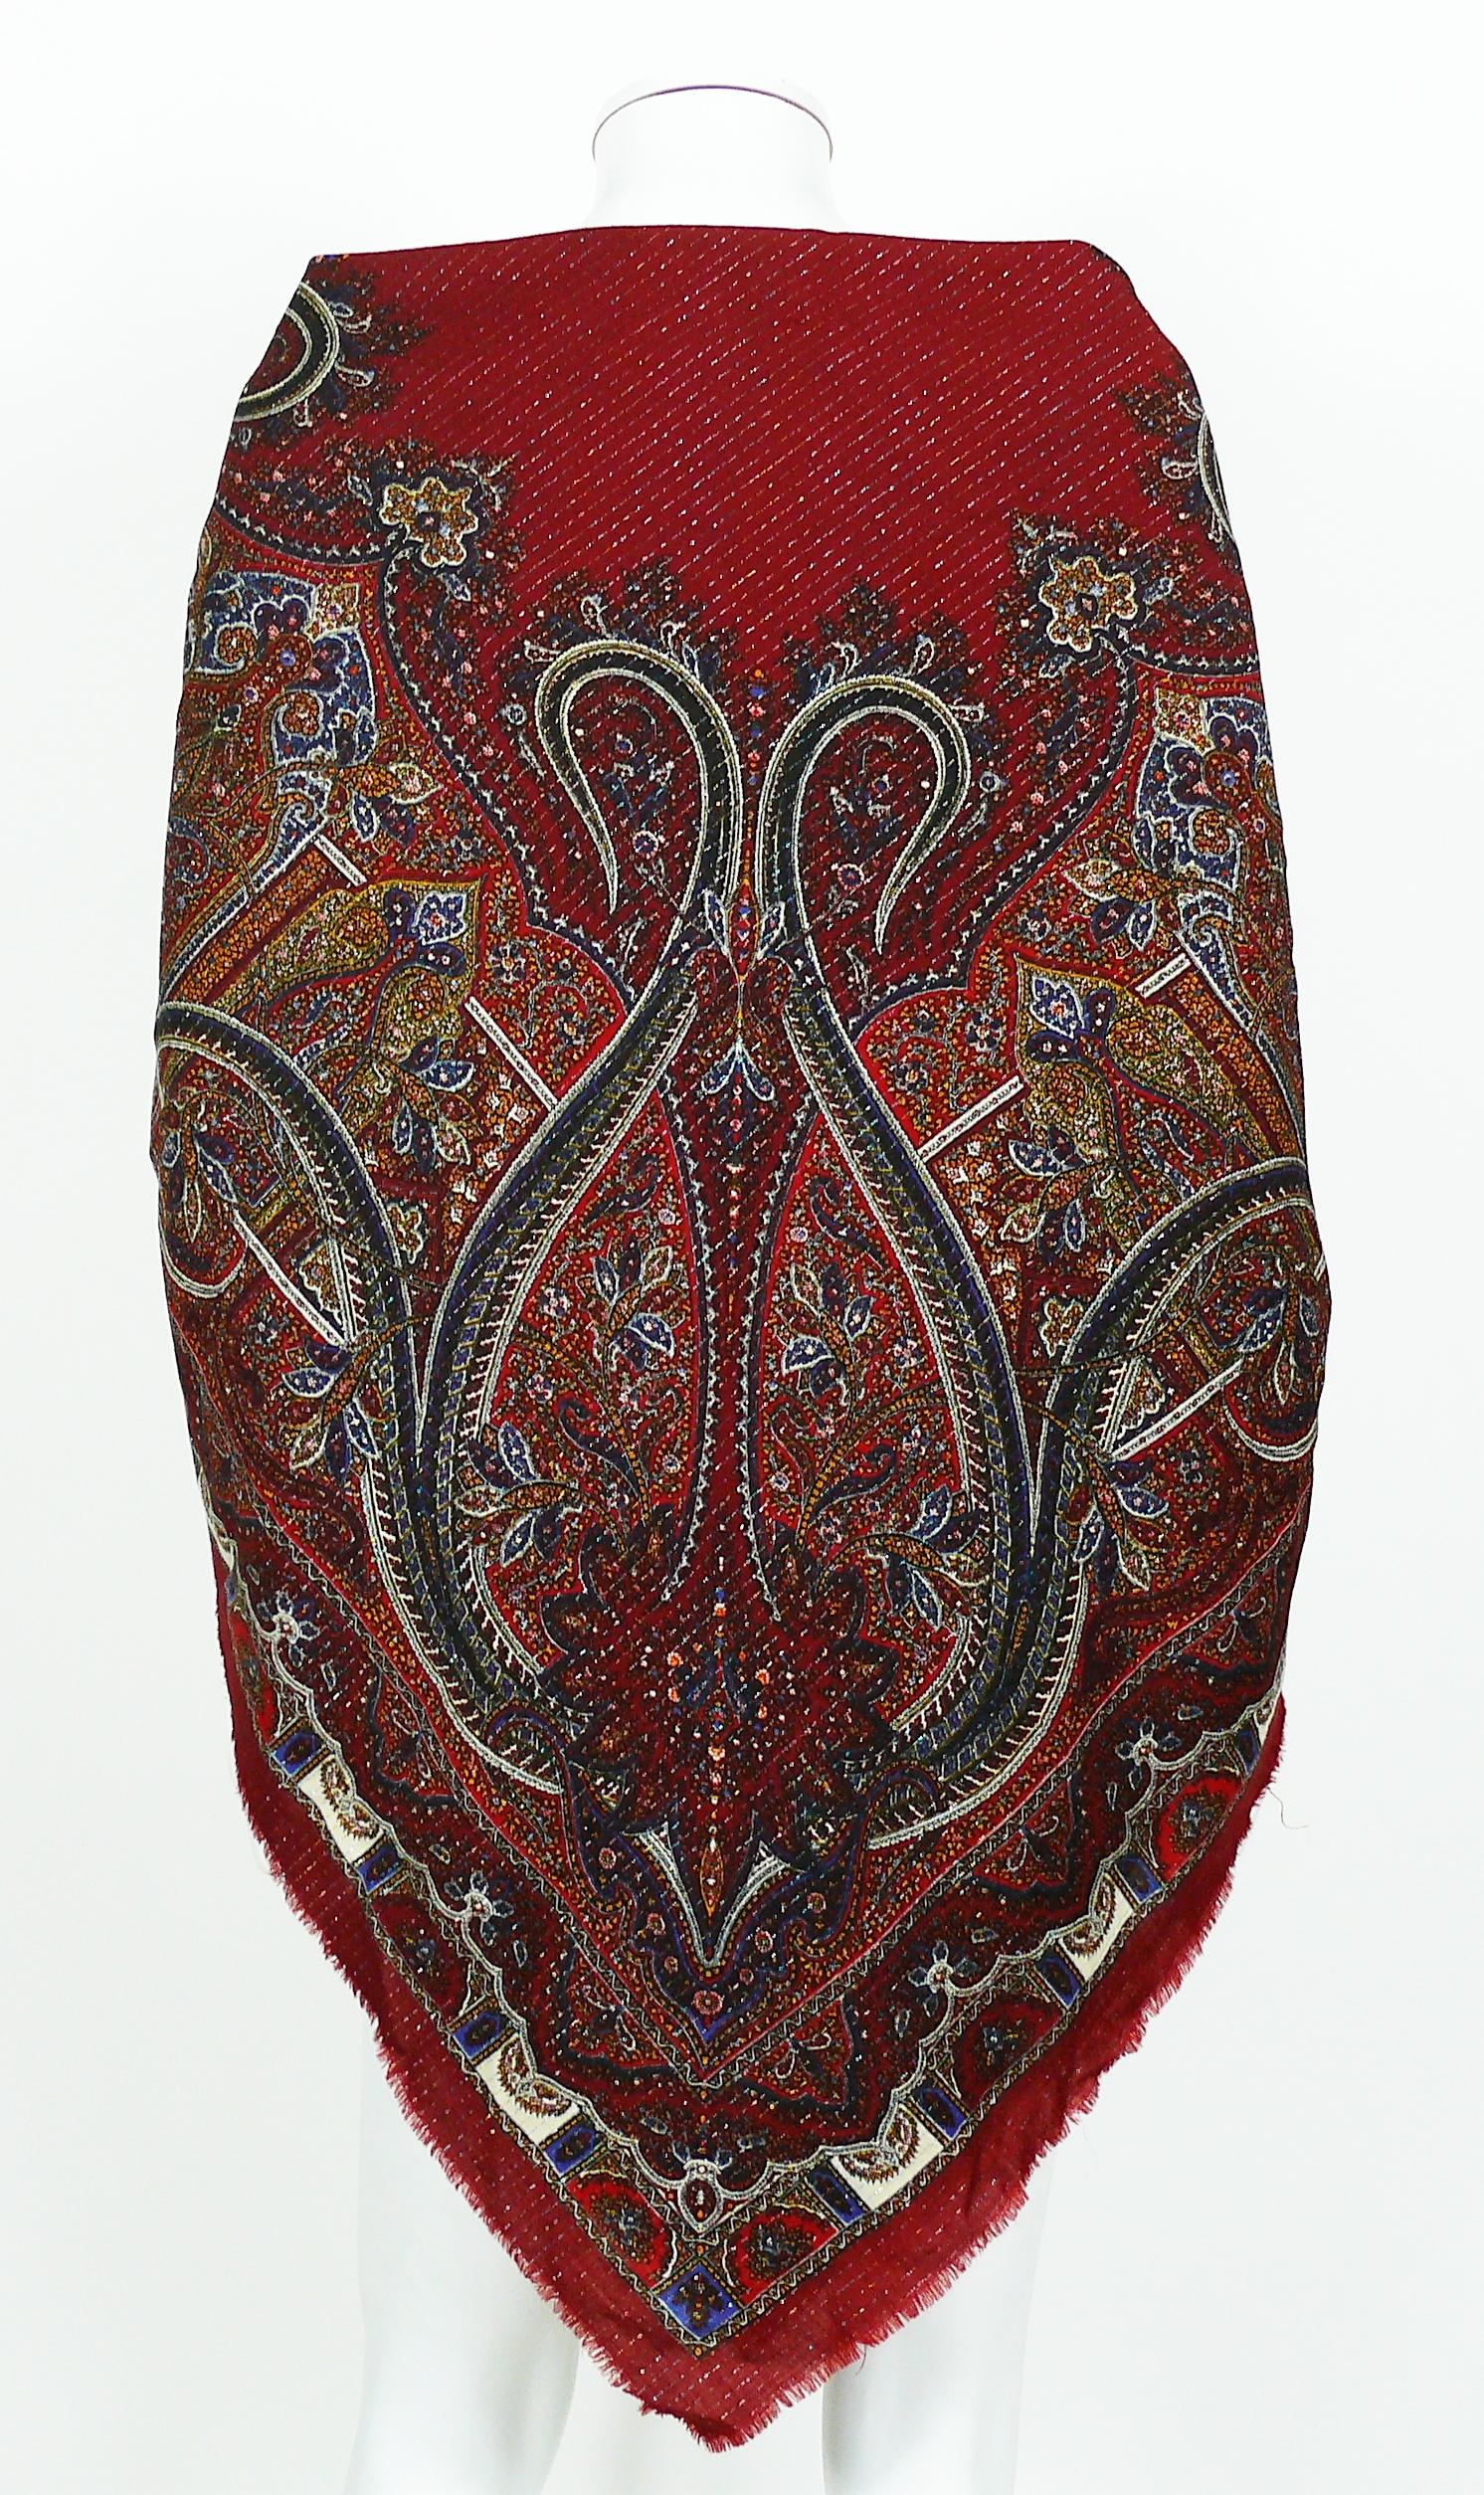 YVES SAINT LAURENT vintage paisley shawl featuring an opulent design with lurex threads on a deep red-burgundy background. Fringe around the edges.

Please note that true colors are closer to photos 2 and 10.

YSL logo.

Label reads YVES SAINT